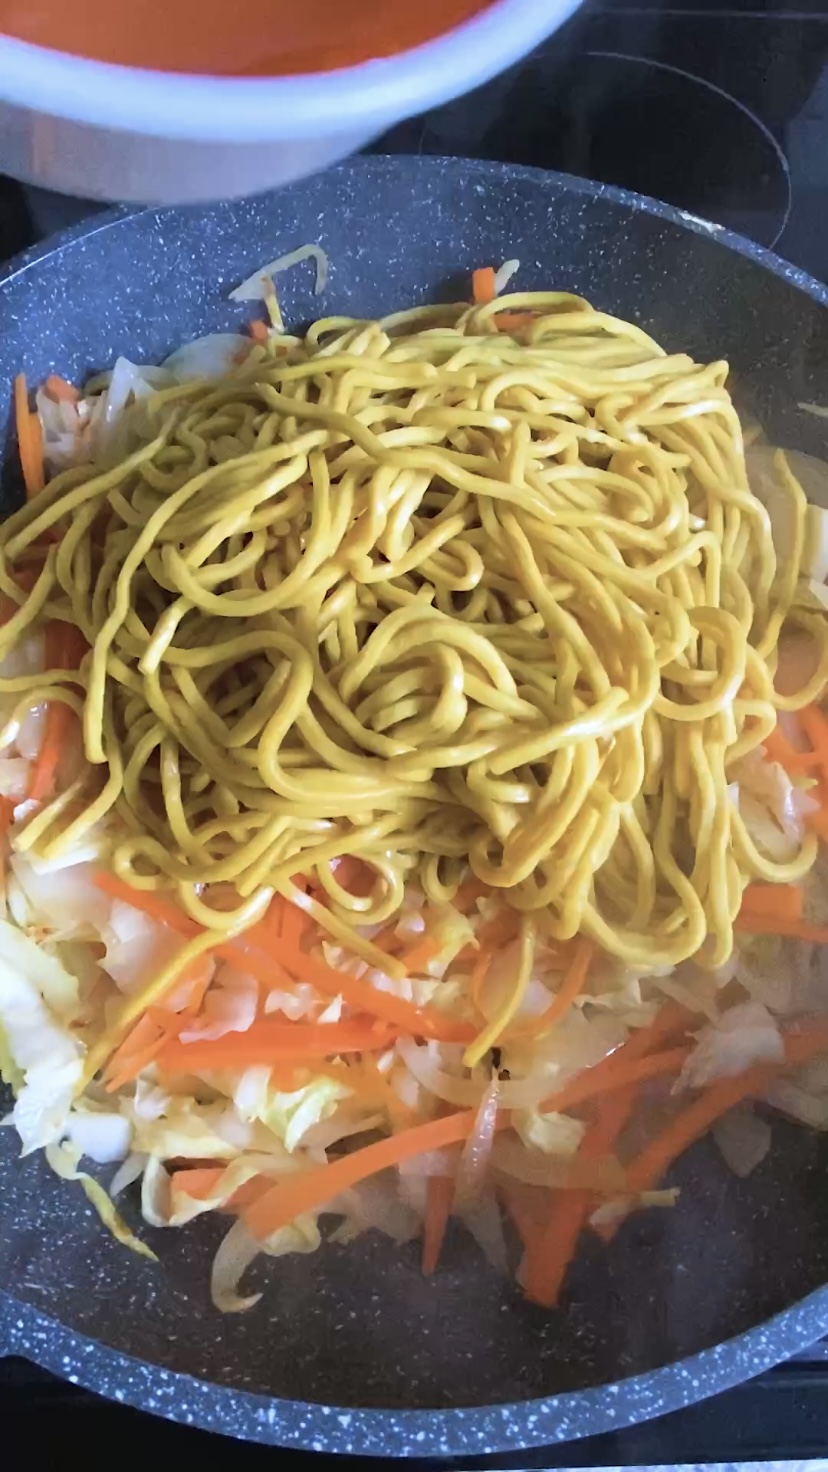 Noodles are added to a skillet of vegetables.